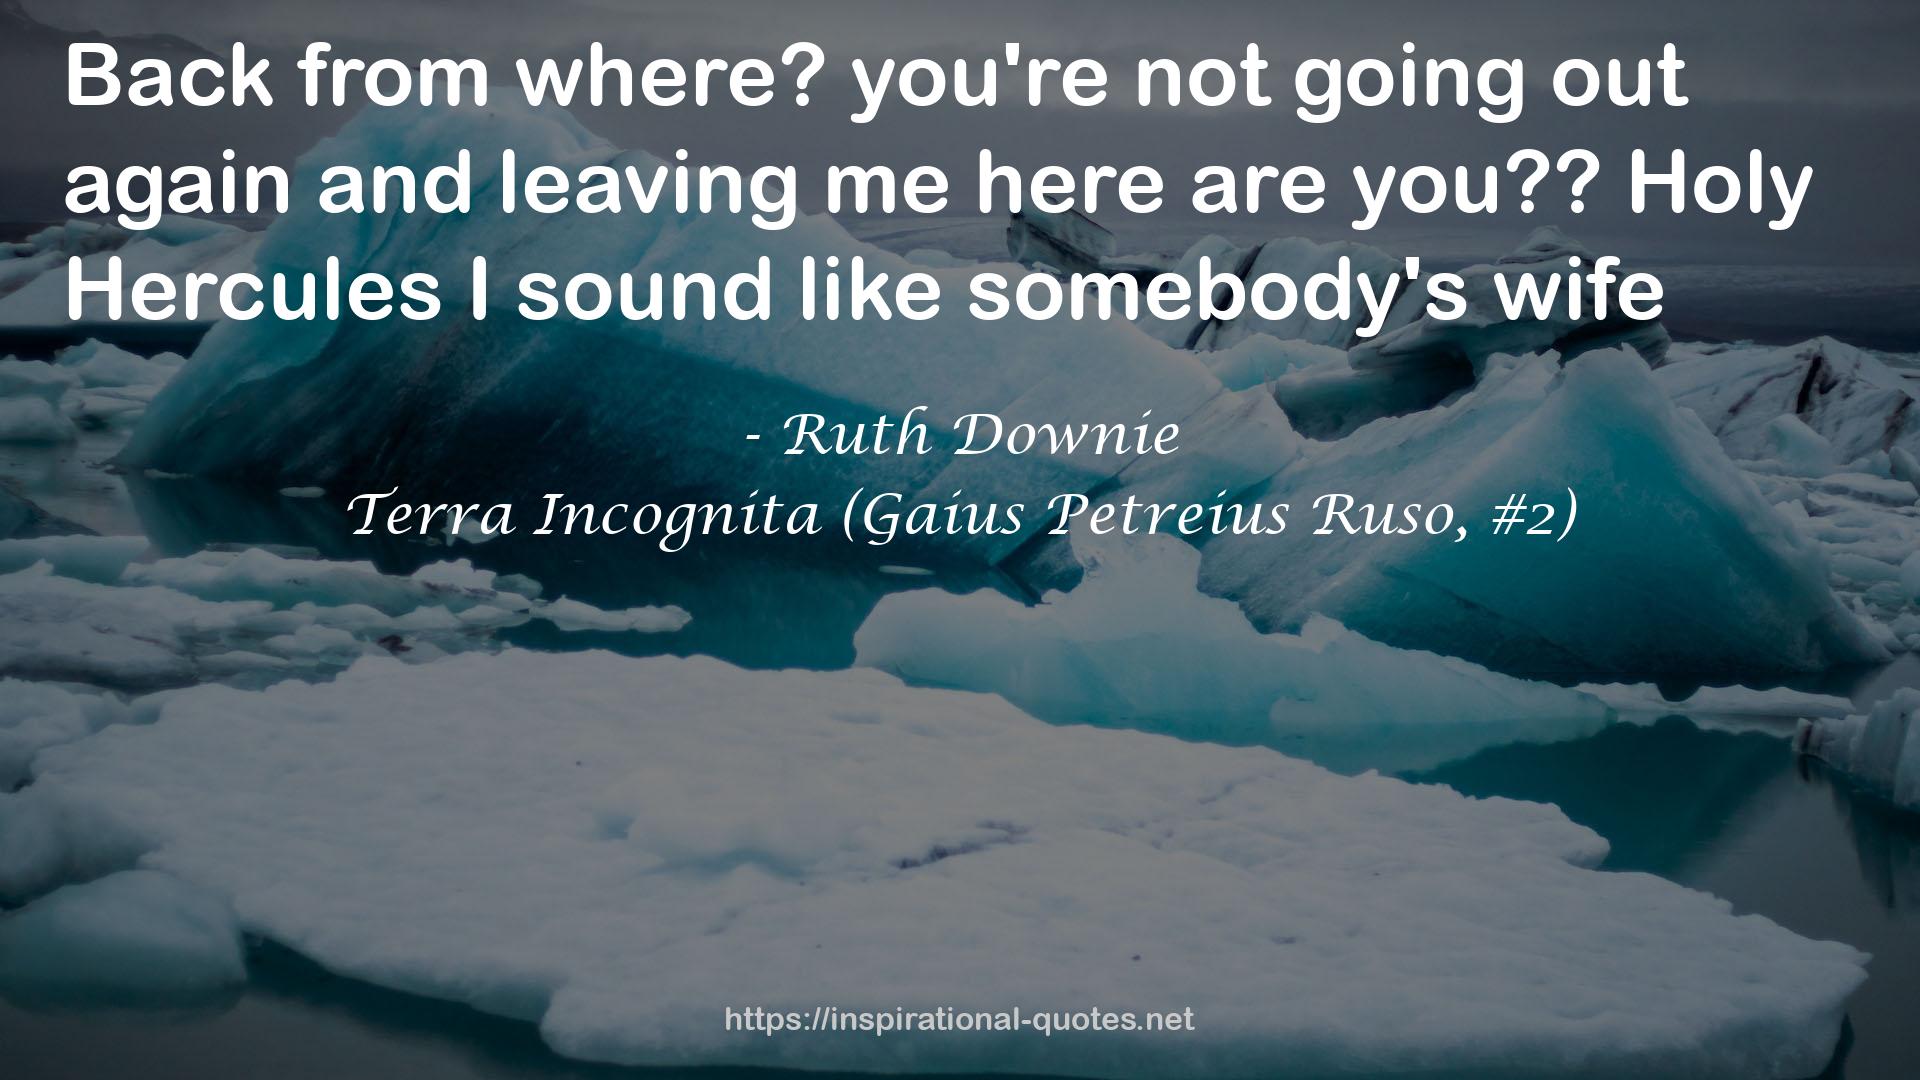 Ruth Downie QUOTES